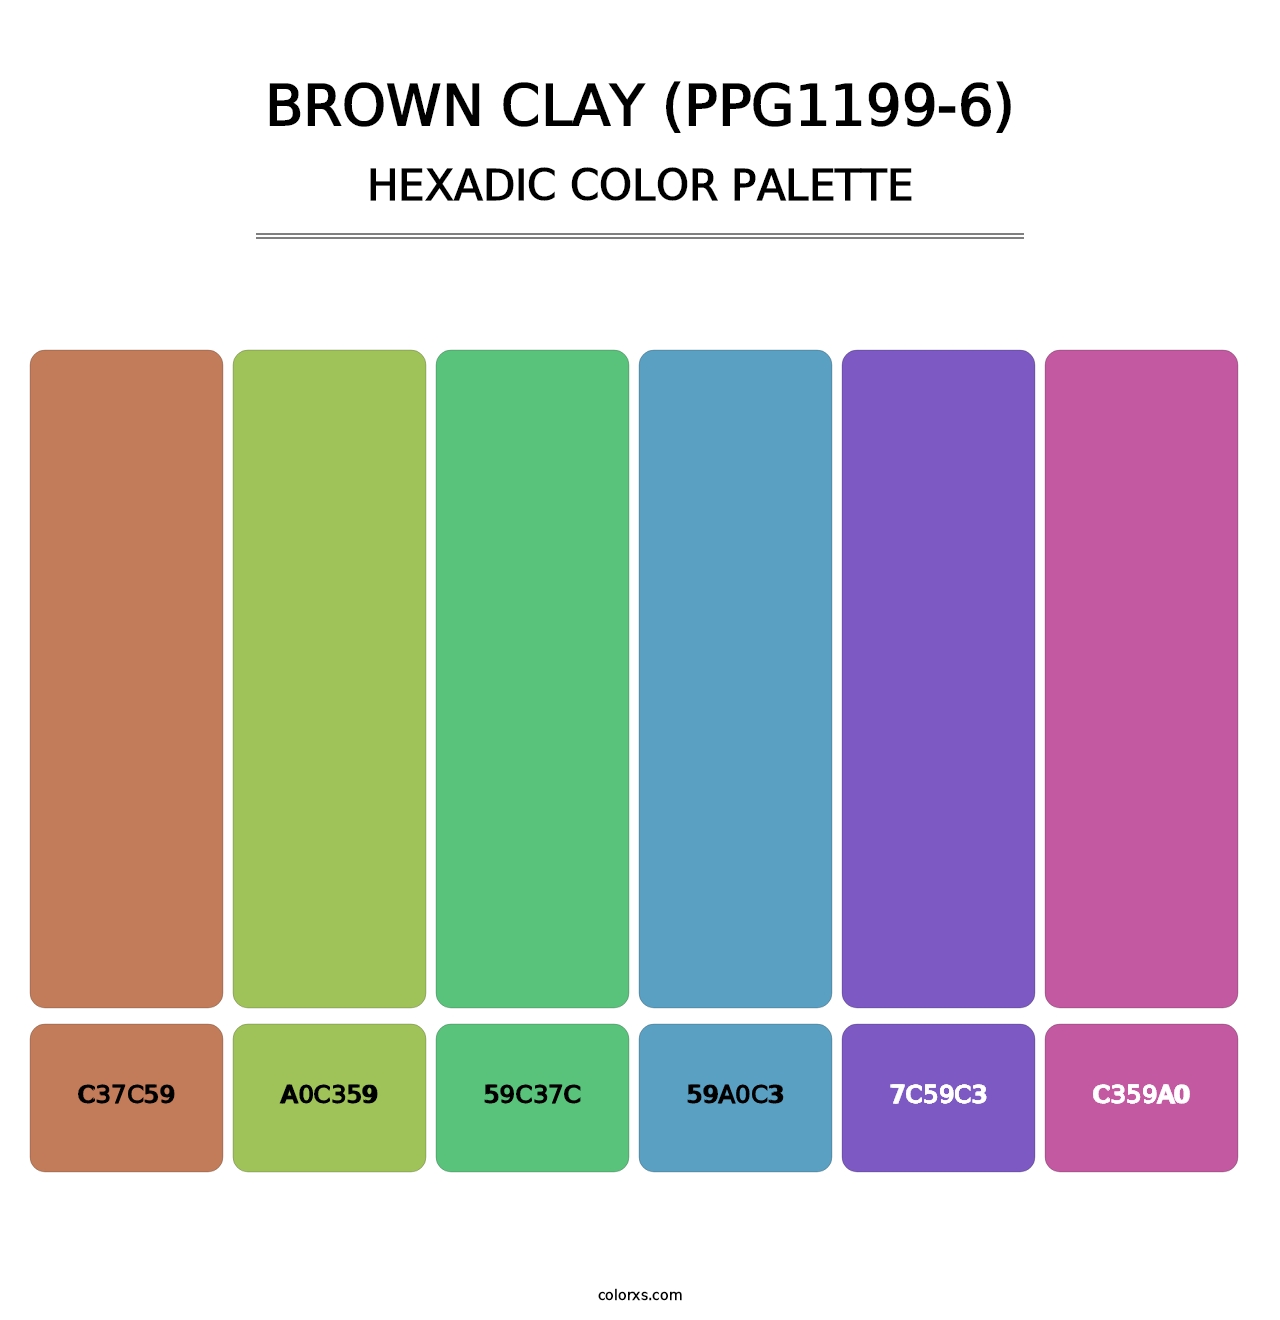 Brown Clay (PPG1199-6) - Hexadic Color Palette